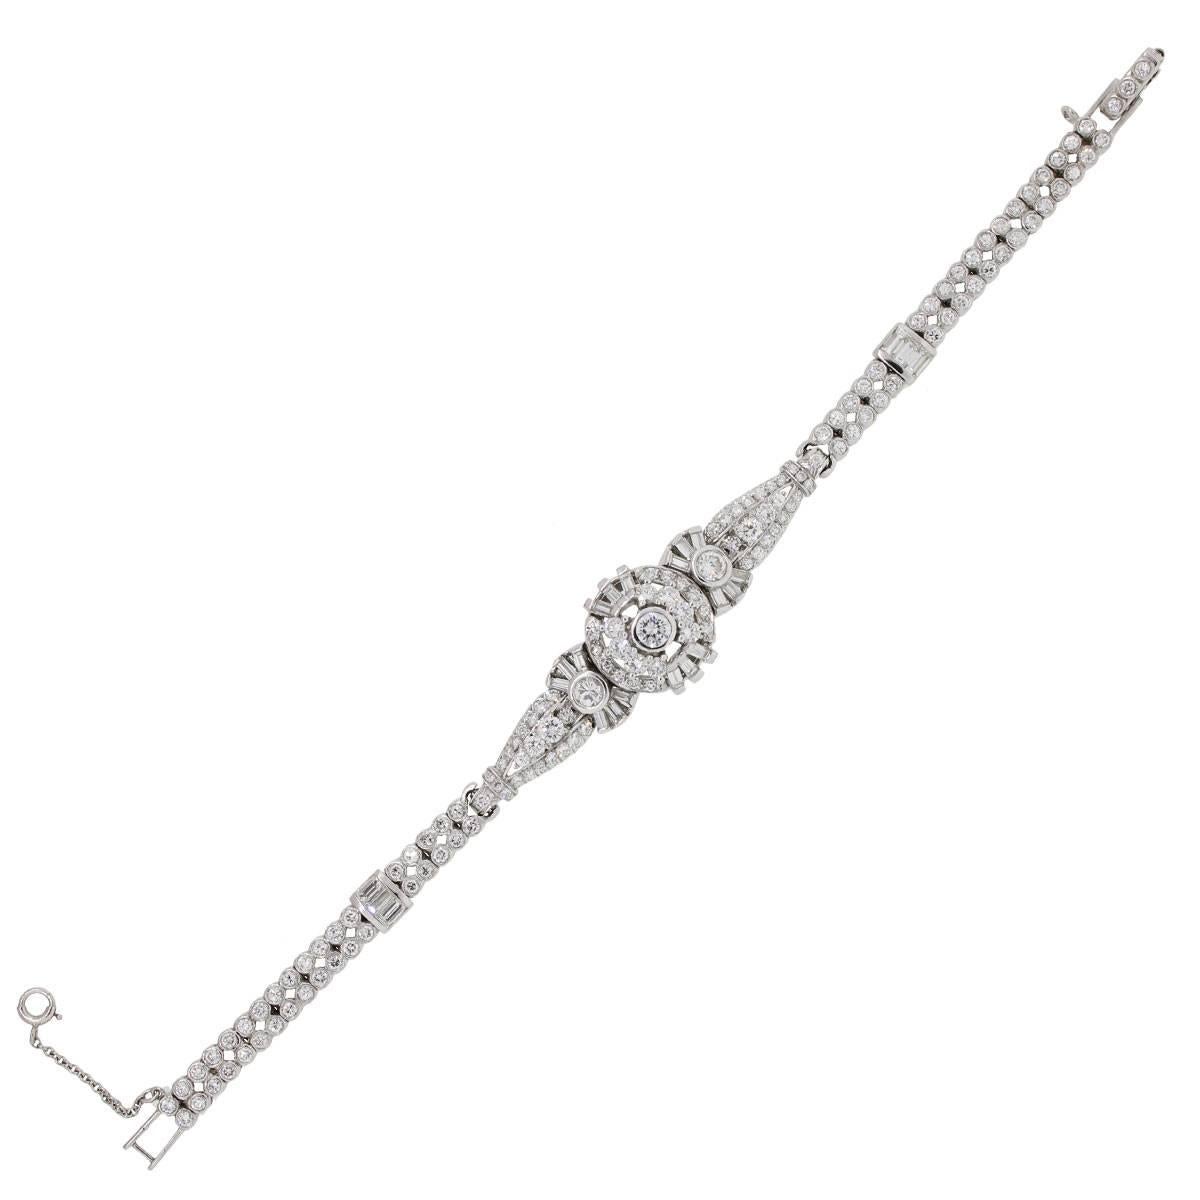 Material: Platinum
Diamond Details: Approximately 6.09ctw of baguette and round shape diamonds. Diamonds are G/H in color and VS in clarity
Fastening: Jewelers’ clasp with safety chain
Measurements: Will fit a 6.75″ wrist
Item Weight: 25.5g